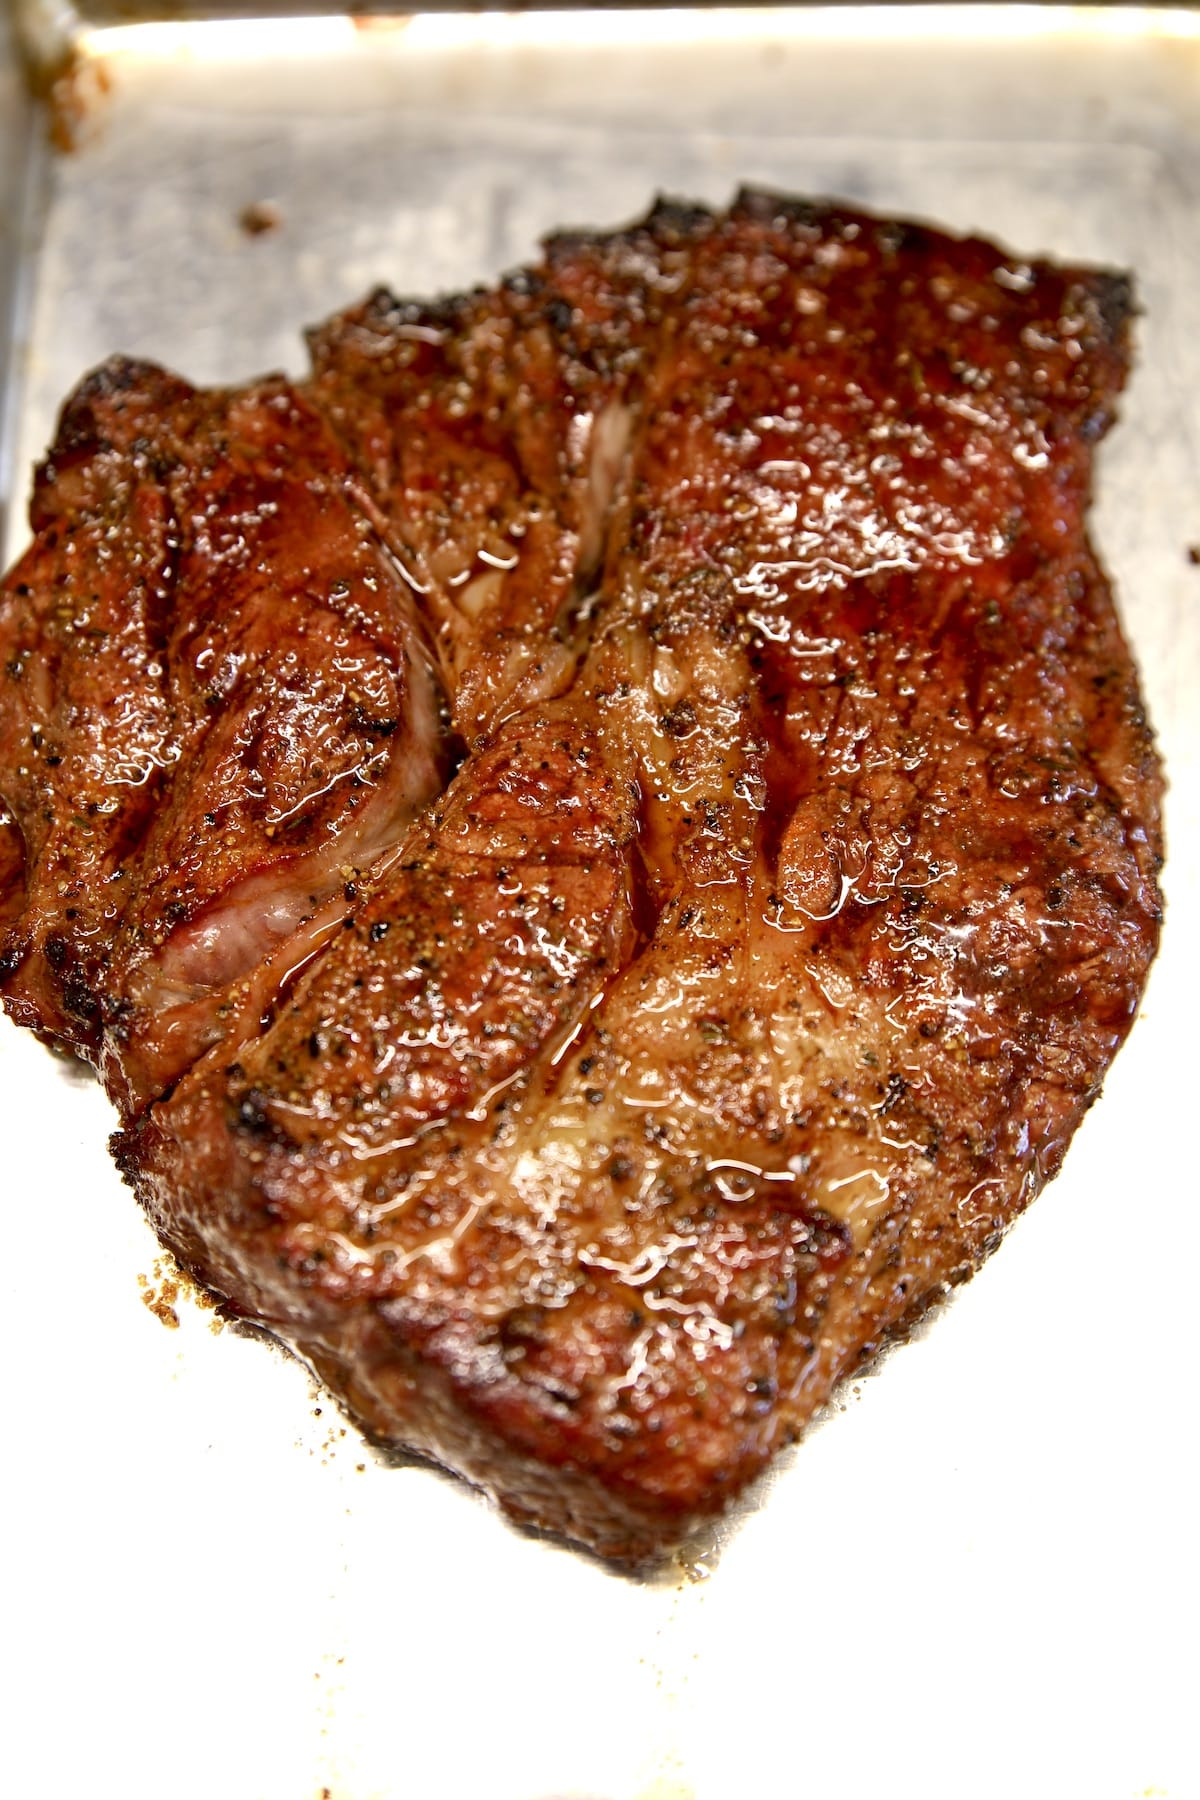 Grilled chuck roast for beef stew recipe.